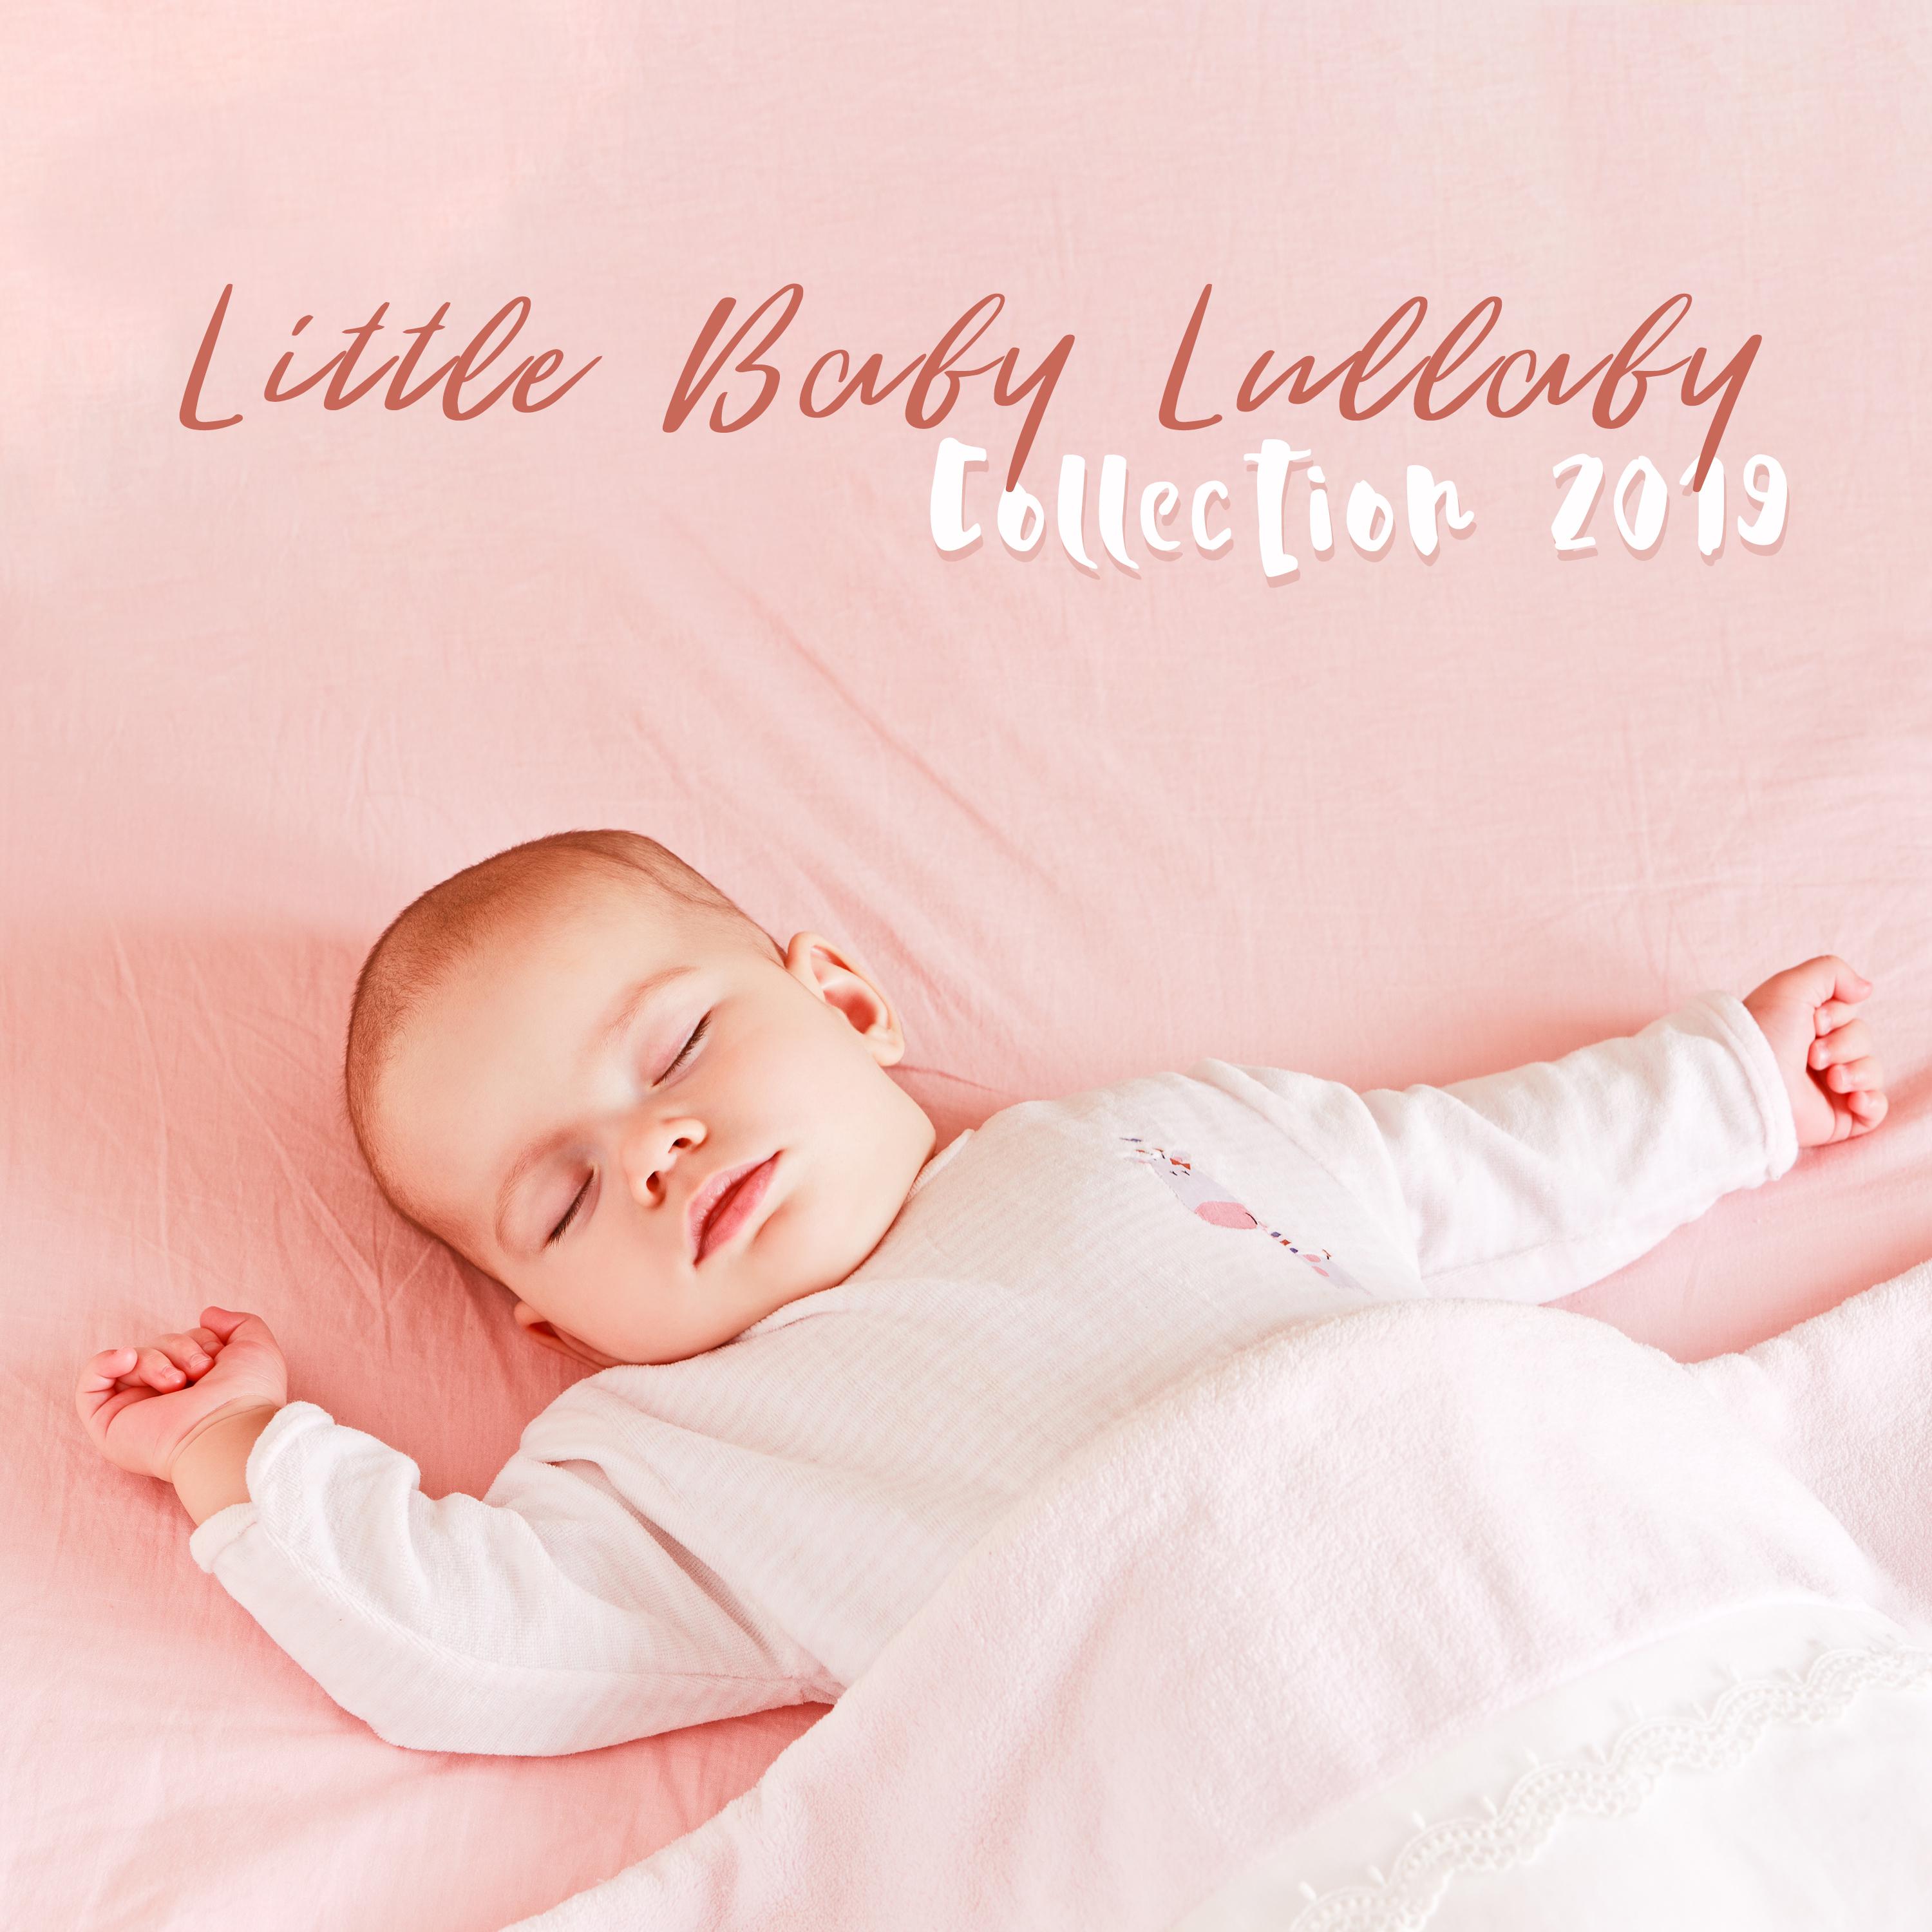 Little Baby Lullaby Collection 2019